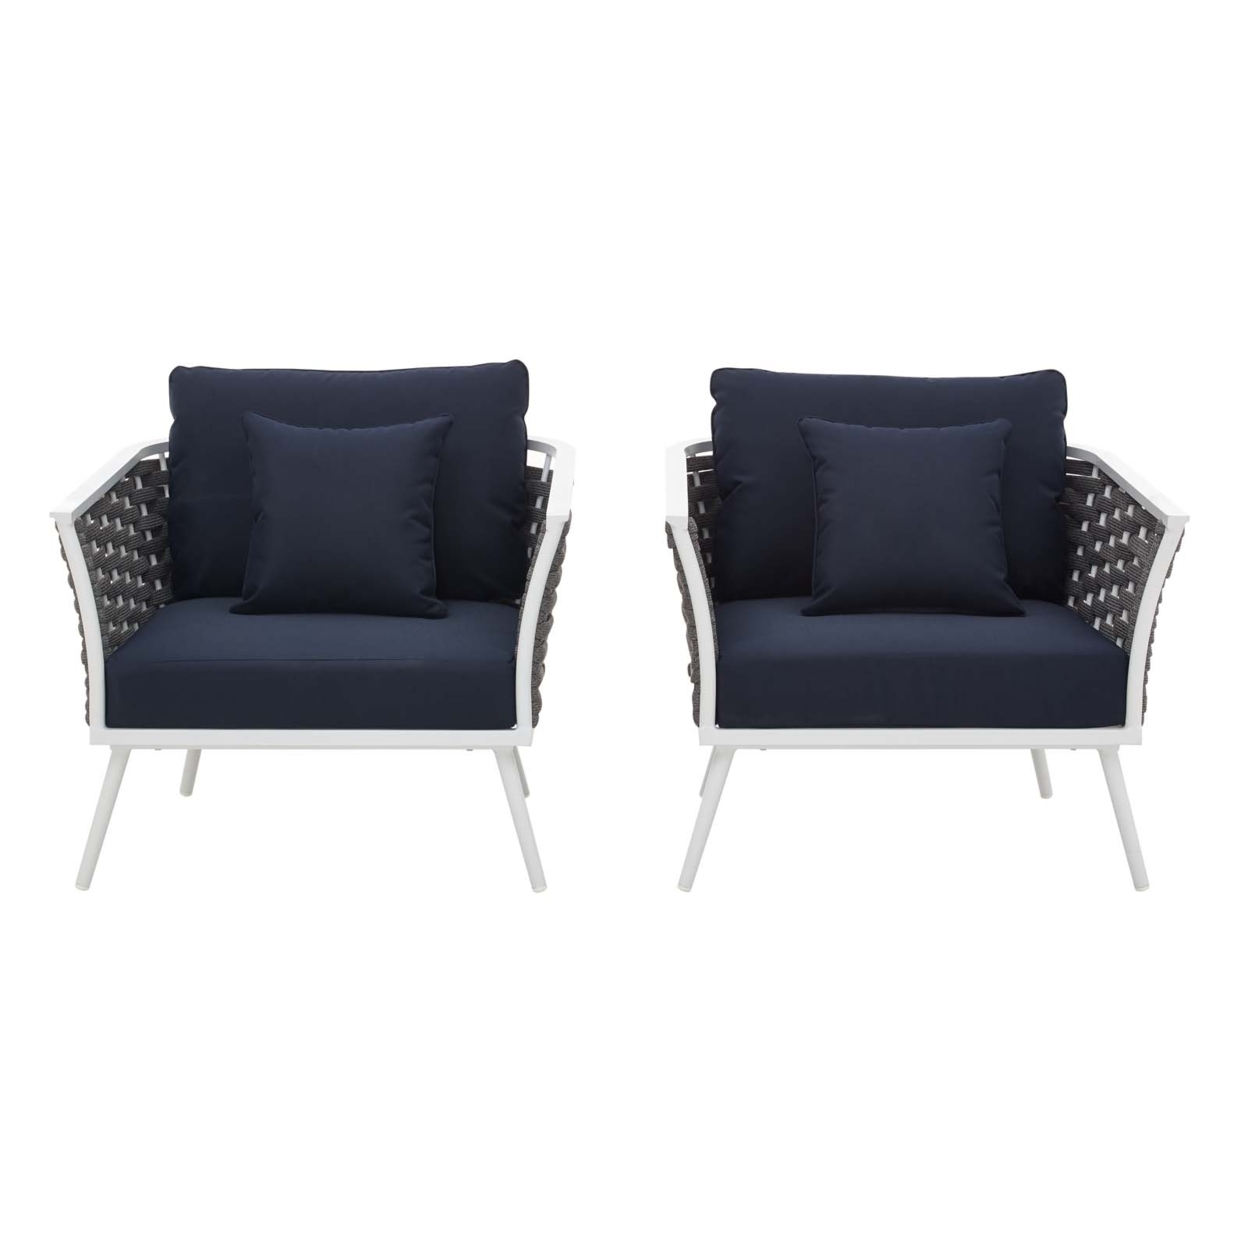 Stance Armchair Outdoor Patio Aluminum Set Of 2,White Navy